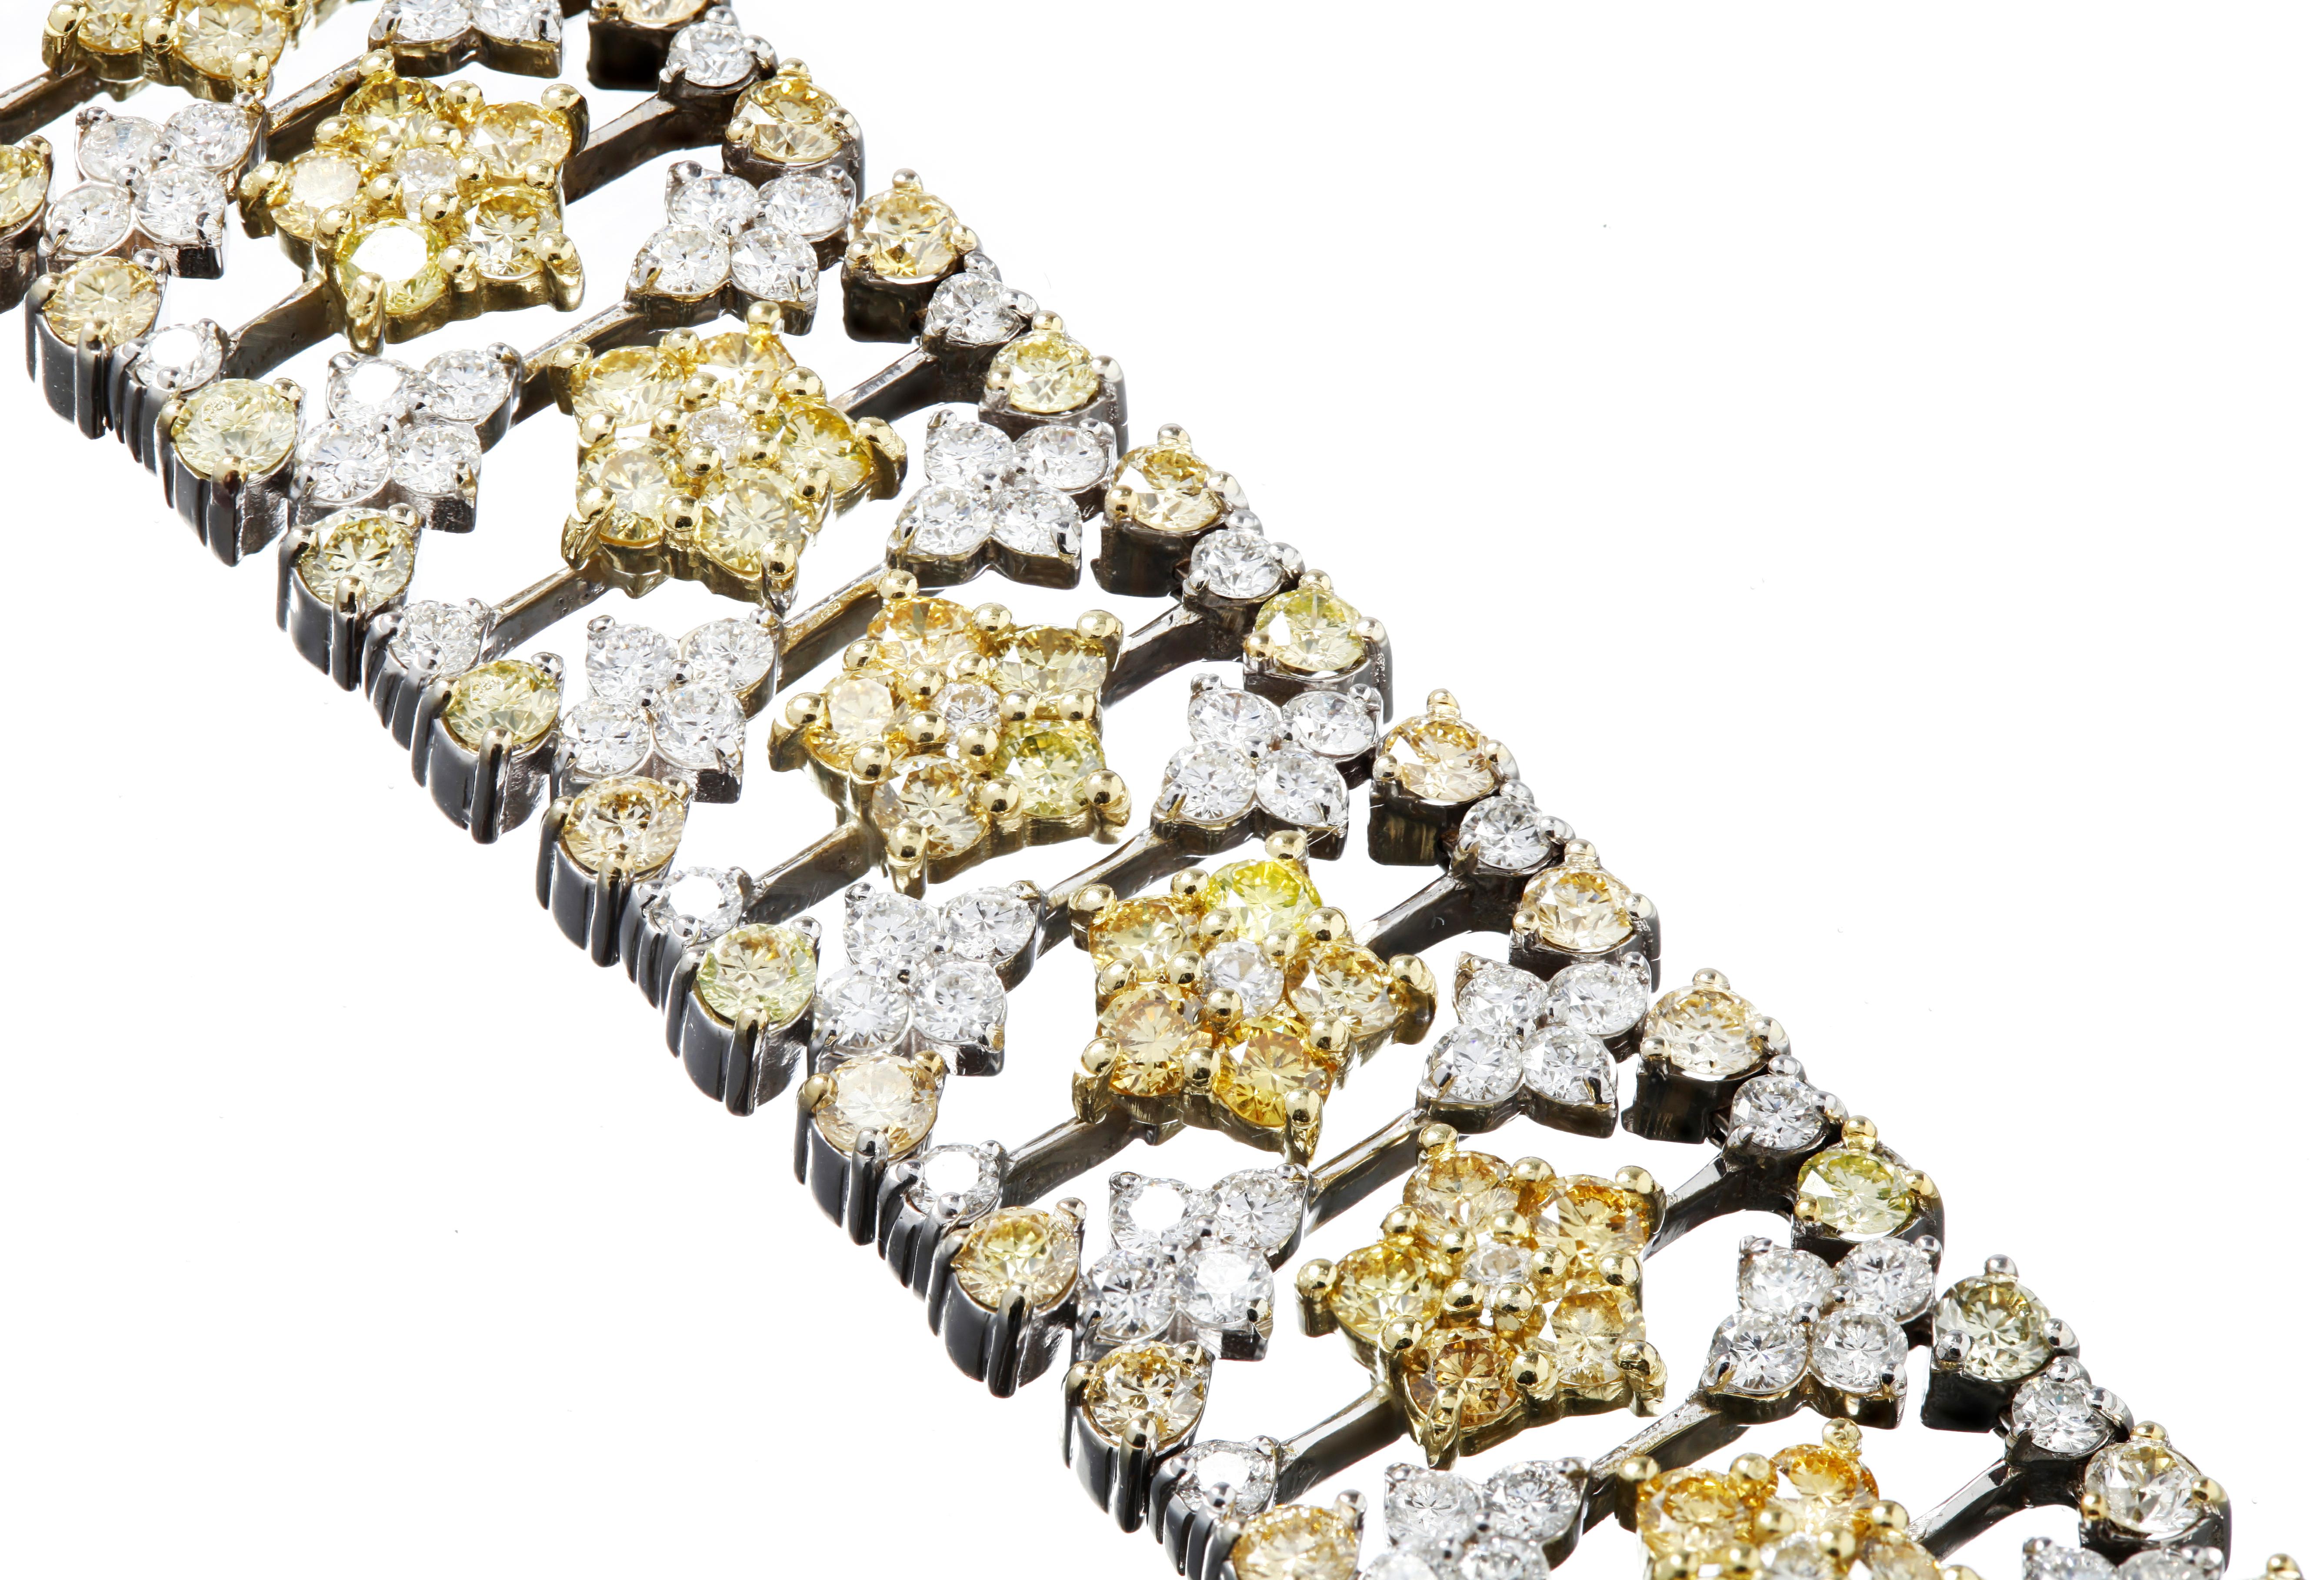 18K Two-Tone Gold Bracelet with White and Yellow Diamonds by Stambolian 

Bracelet has 7.80 carat G color, VS clarity white diamonds
12.69 carat Yellow Diamonds

Limited piece. This is one of only Three made.

Clasp is where it reads 